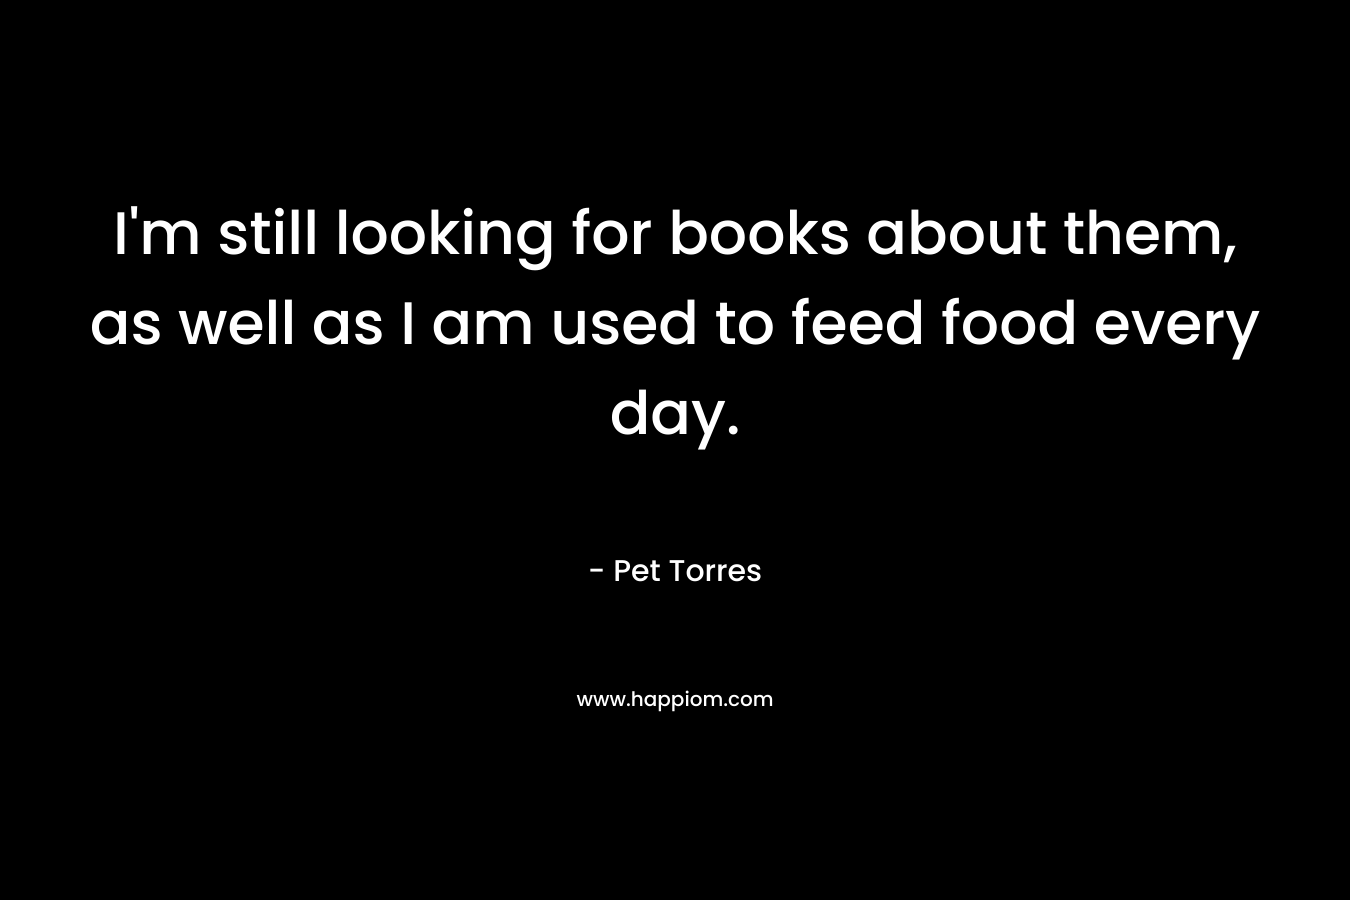 I'm still looking for books about them, as well as I am used to feed food every day.